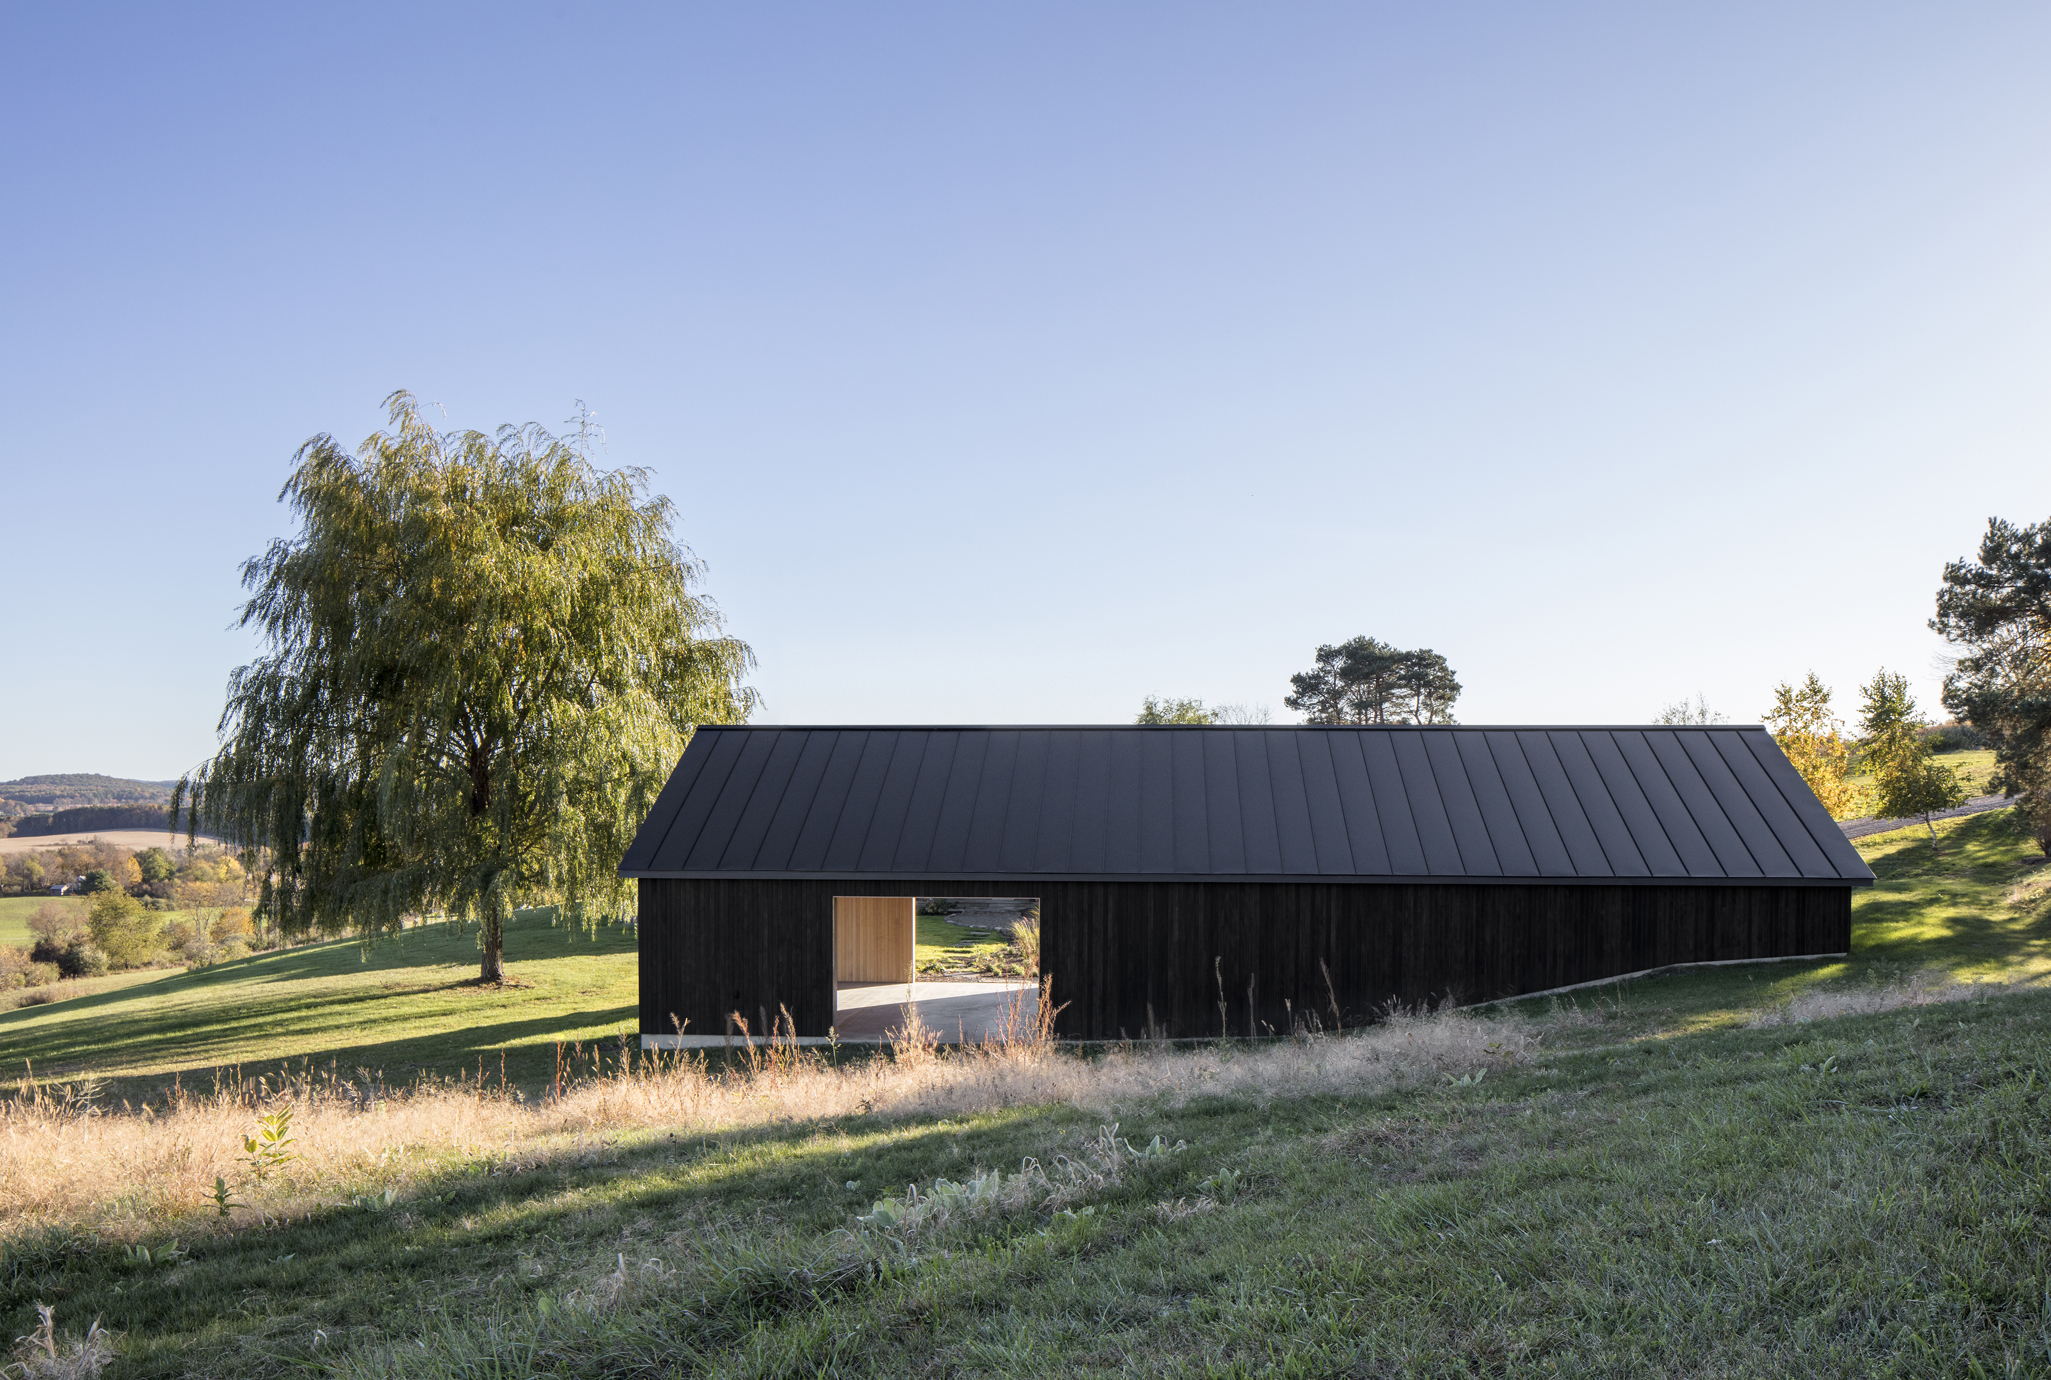 A storage barn in upstate New York, designed by Worrell Yeung.